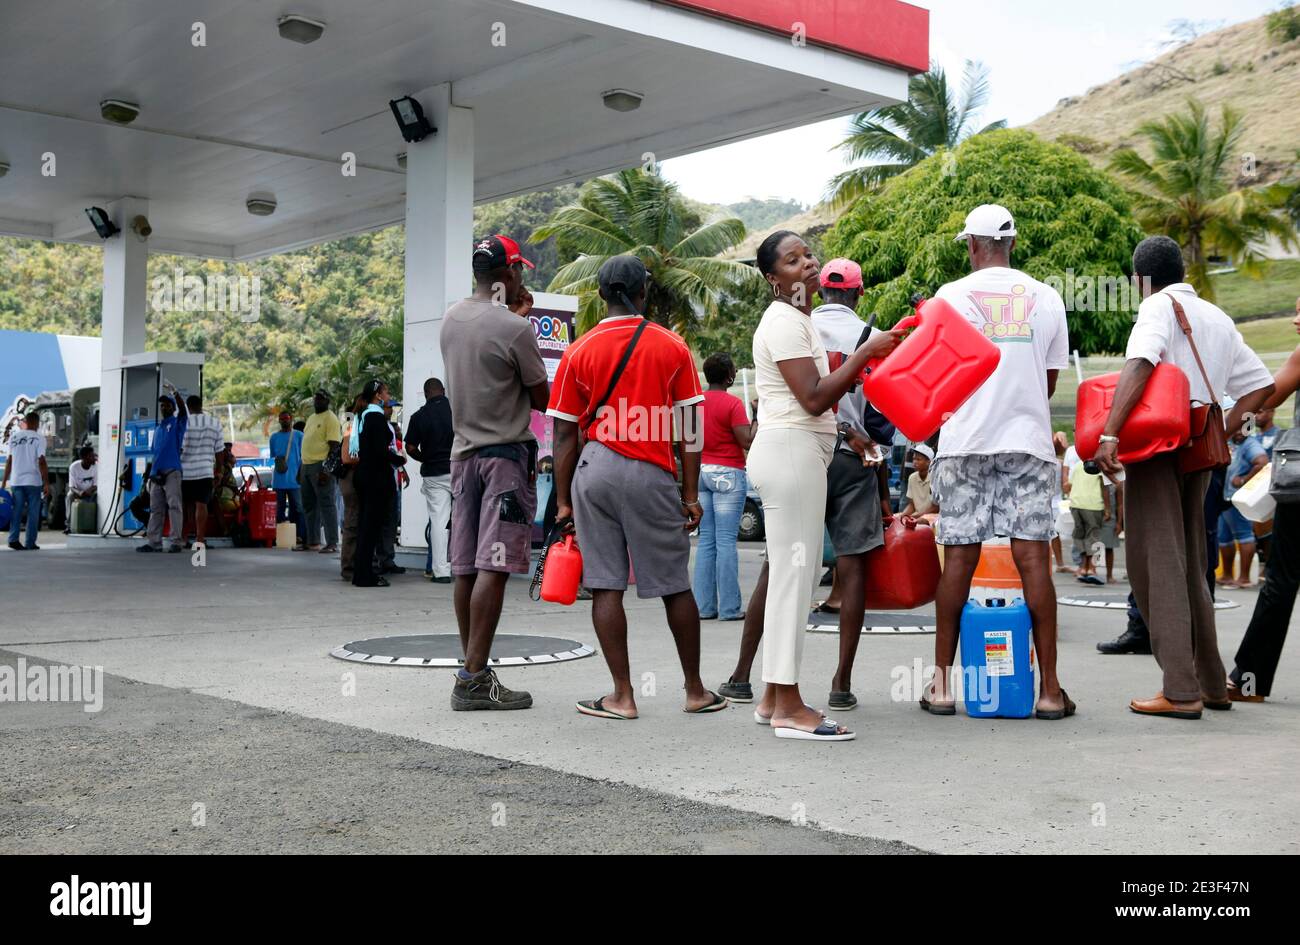 People queue up as they wait to fill up their drum in gas station in Marin, Martinique on February 17, 2009. Strikes paralysing Guadeloupe and Martinique are devastating the economies of the French Caribbean islands and causing much of the vital tourism sector there to shut down, business leaders have stated. Guadeloupe, entering its third week of a general strike, will lose about 100 million euros (130 million dollars) in a month, and economic damage was set to reach the same level in Martinique, where a similar stoppage began last week. Photo by Patrice Coppee/ABACAPRESS.COM Stock Photo